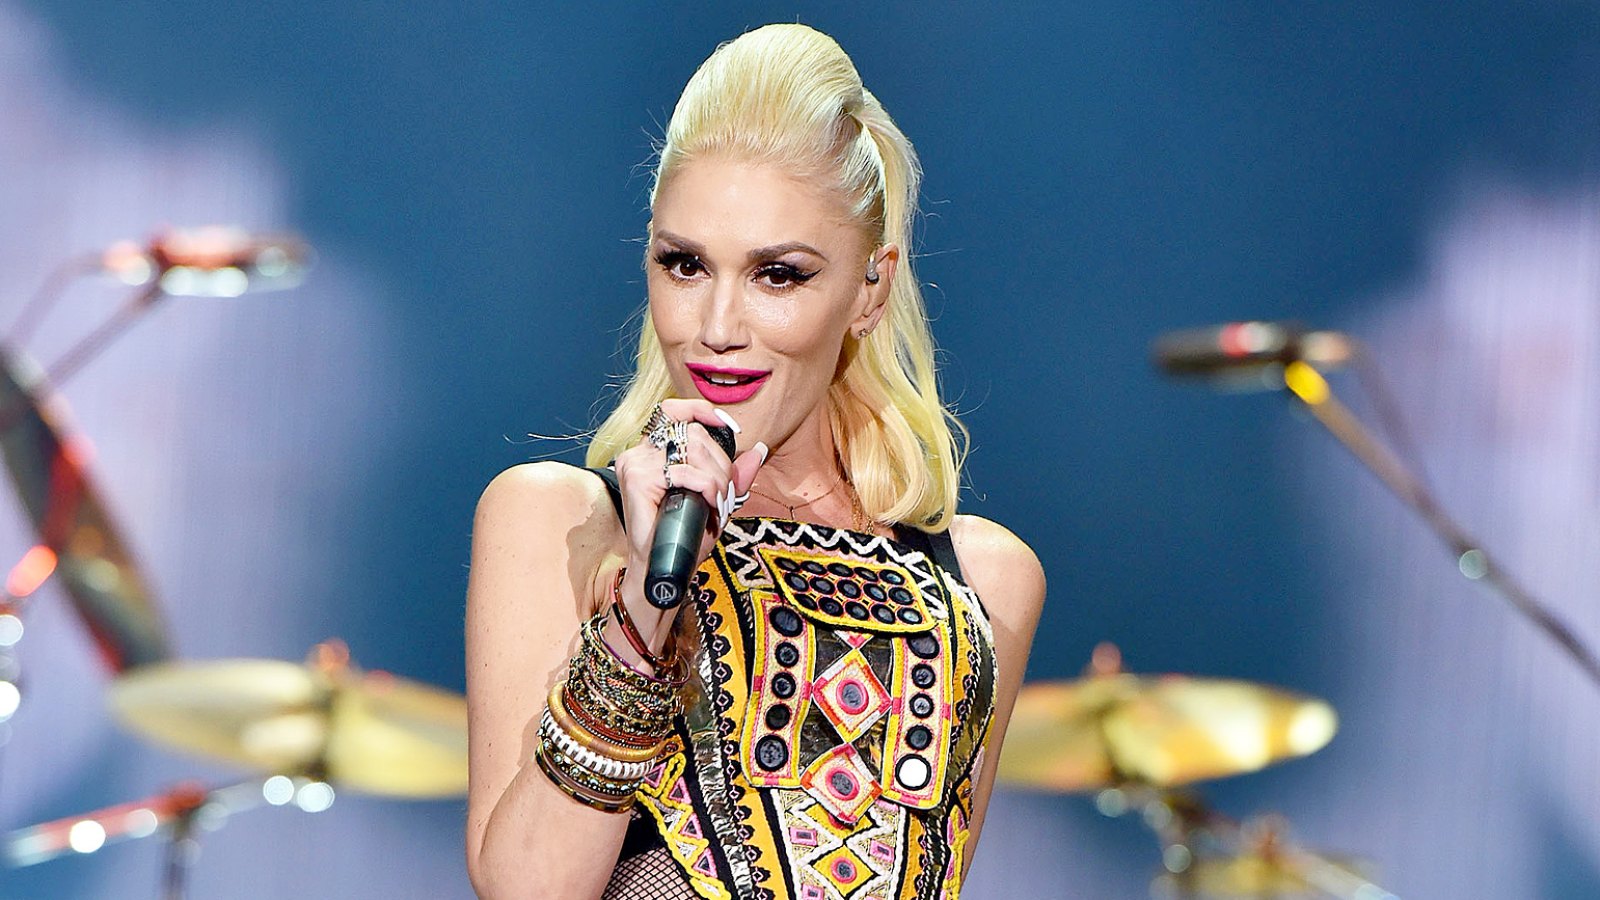 Gwen Stefani performs during the 2015 KAABOO Del Mar at the Del Mar Fairgrounds in Del Mar, California.